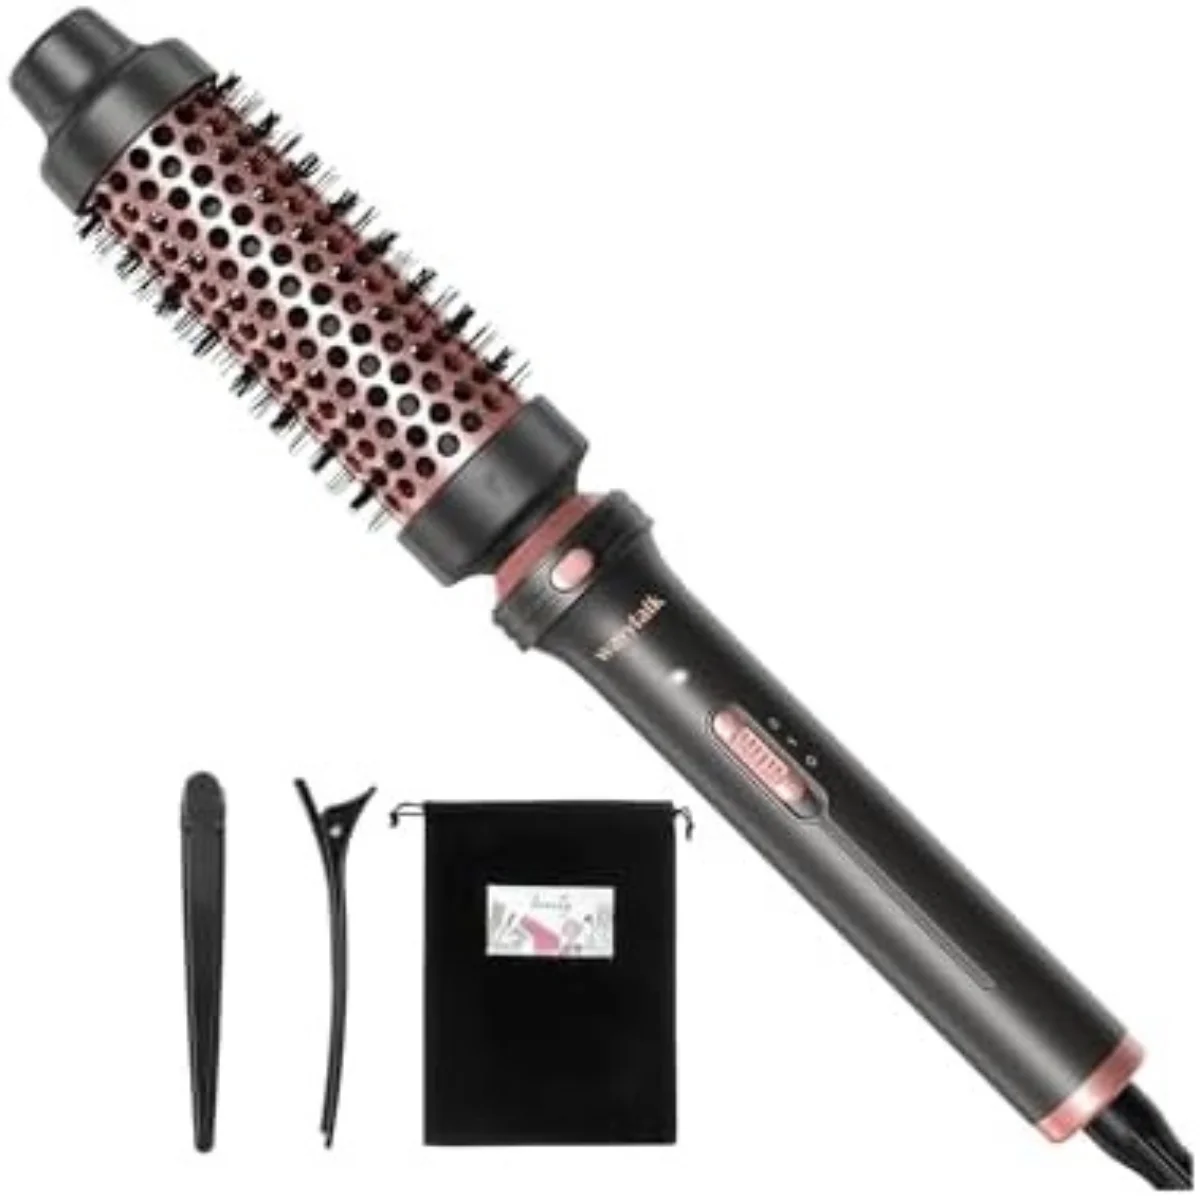 Wavytalk Thermal Brush, Iron Travel Ceramic Dual Voltage Brush and Head Retail Detachable Round Tourmaline for Heated – Curling with Hot 1/2 PTC Round Crest Brush, Brush inch 1 with Heater